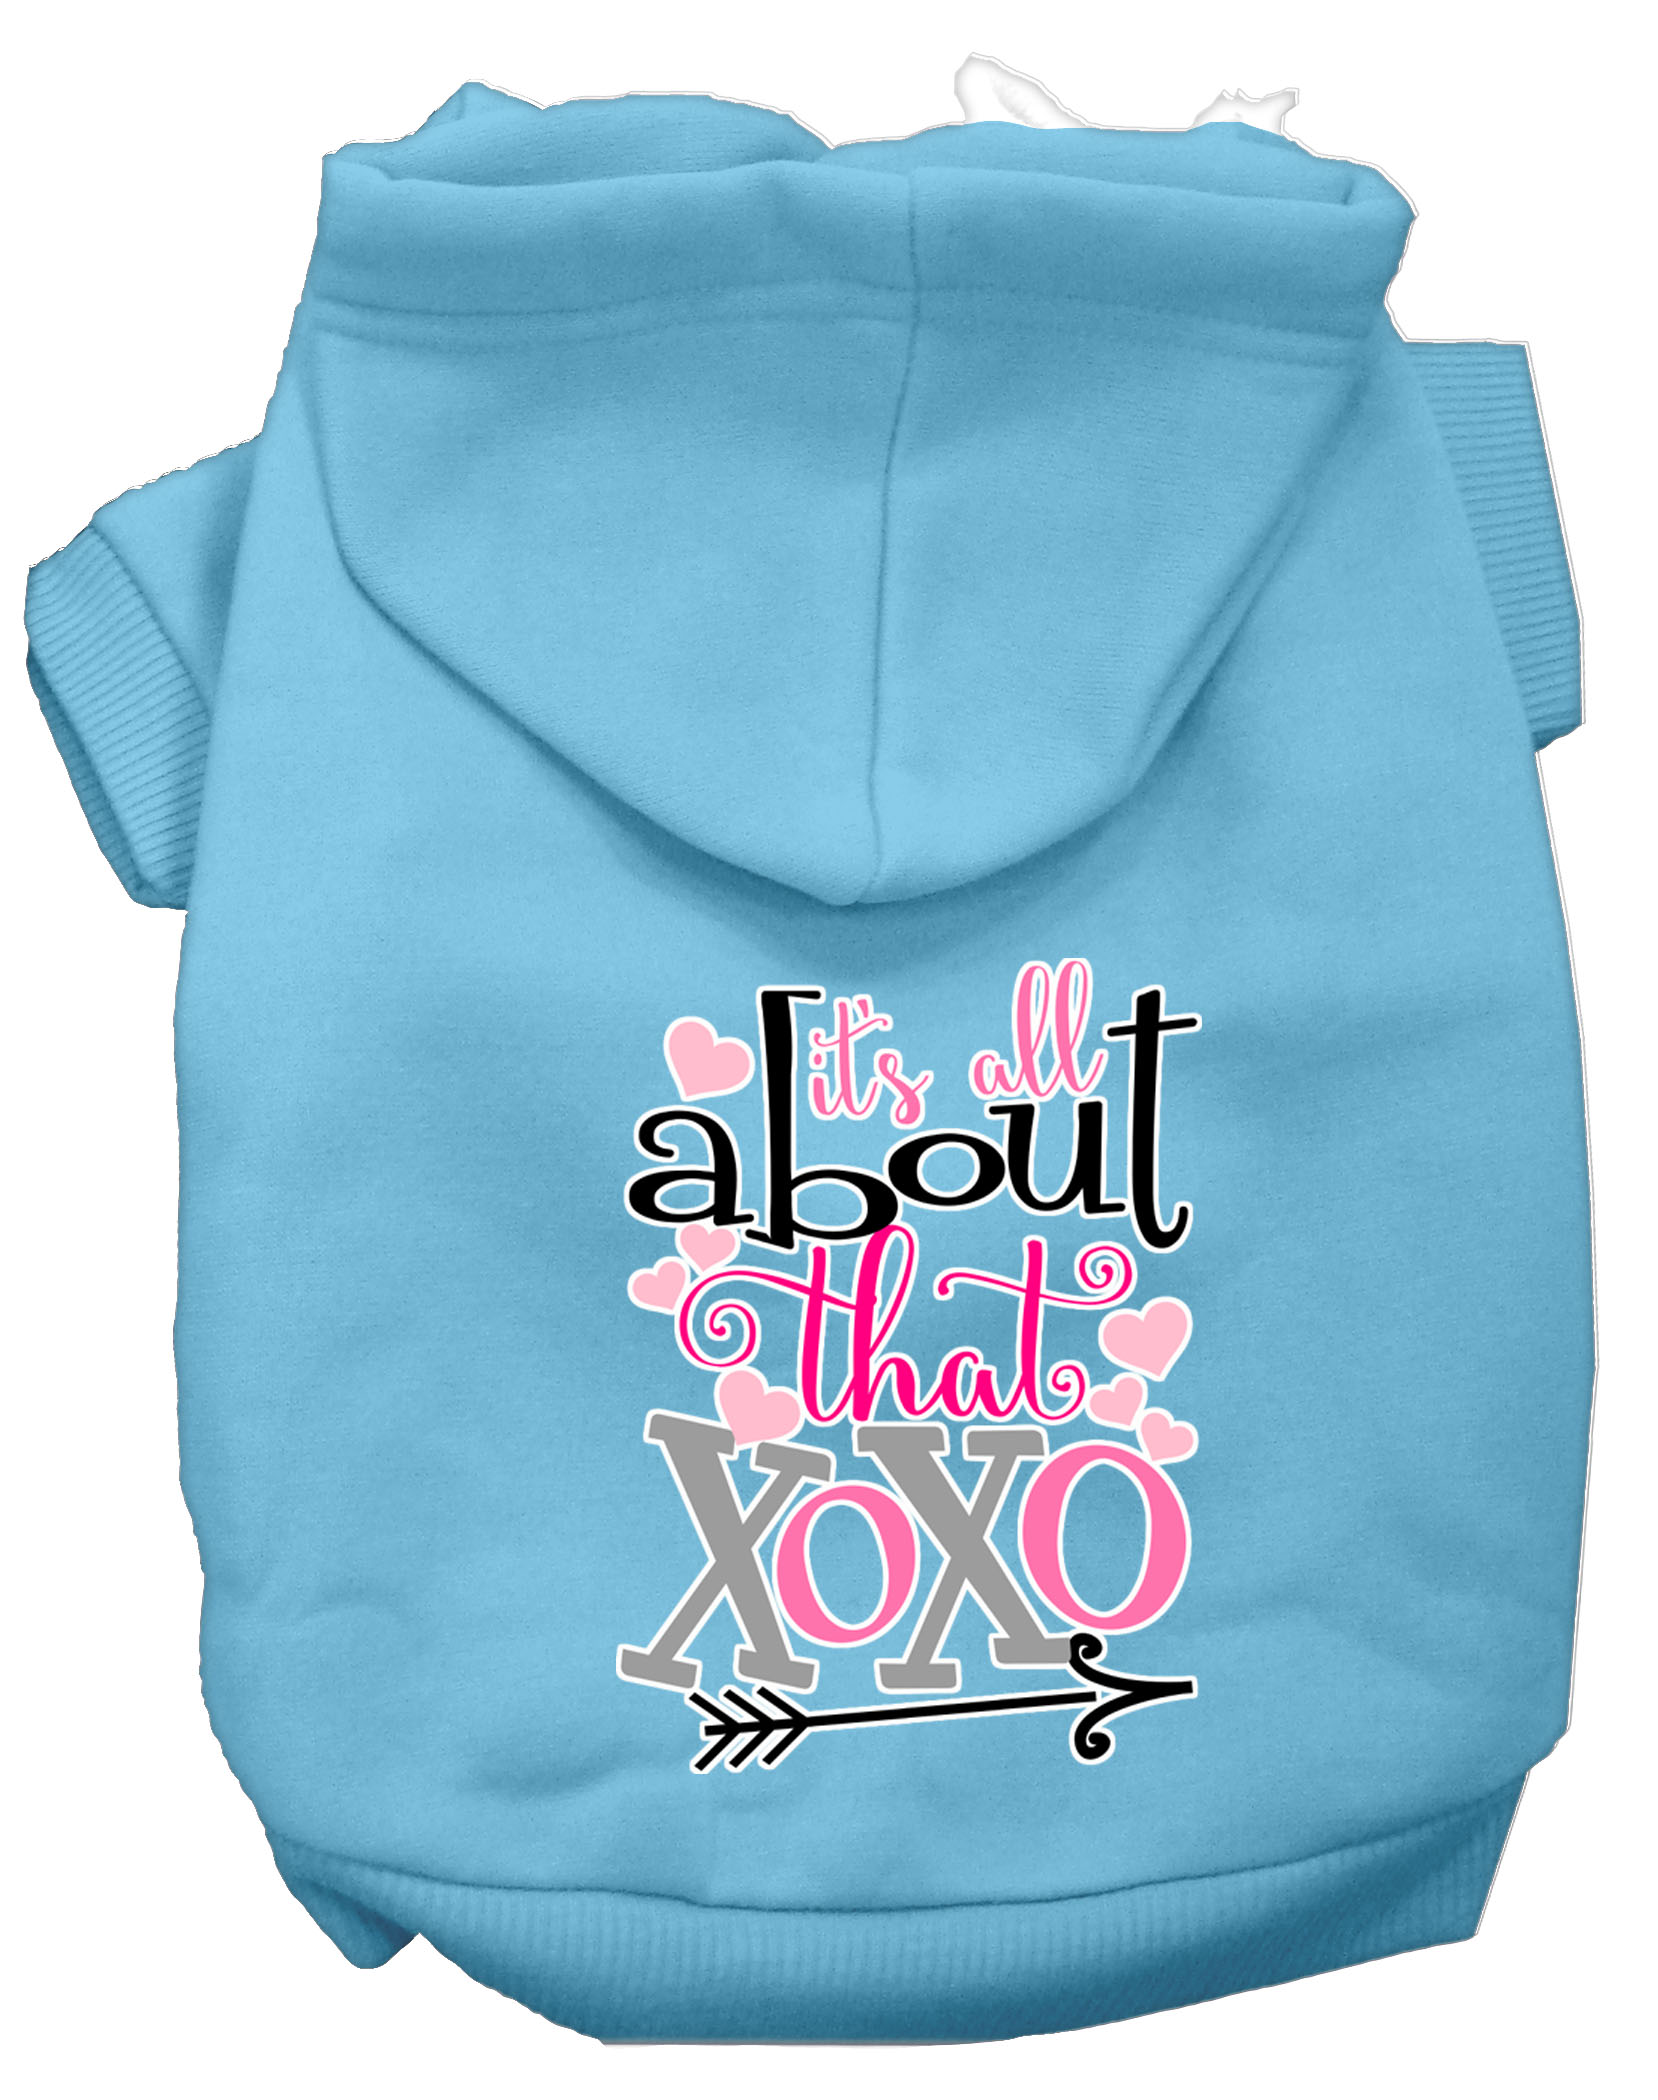 All About that XOXO Screen Print Dog Hoodie Baby Blue L